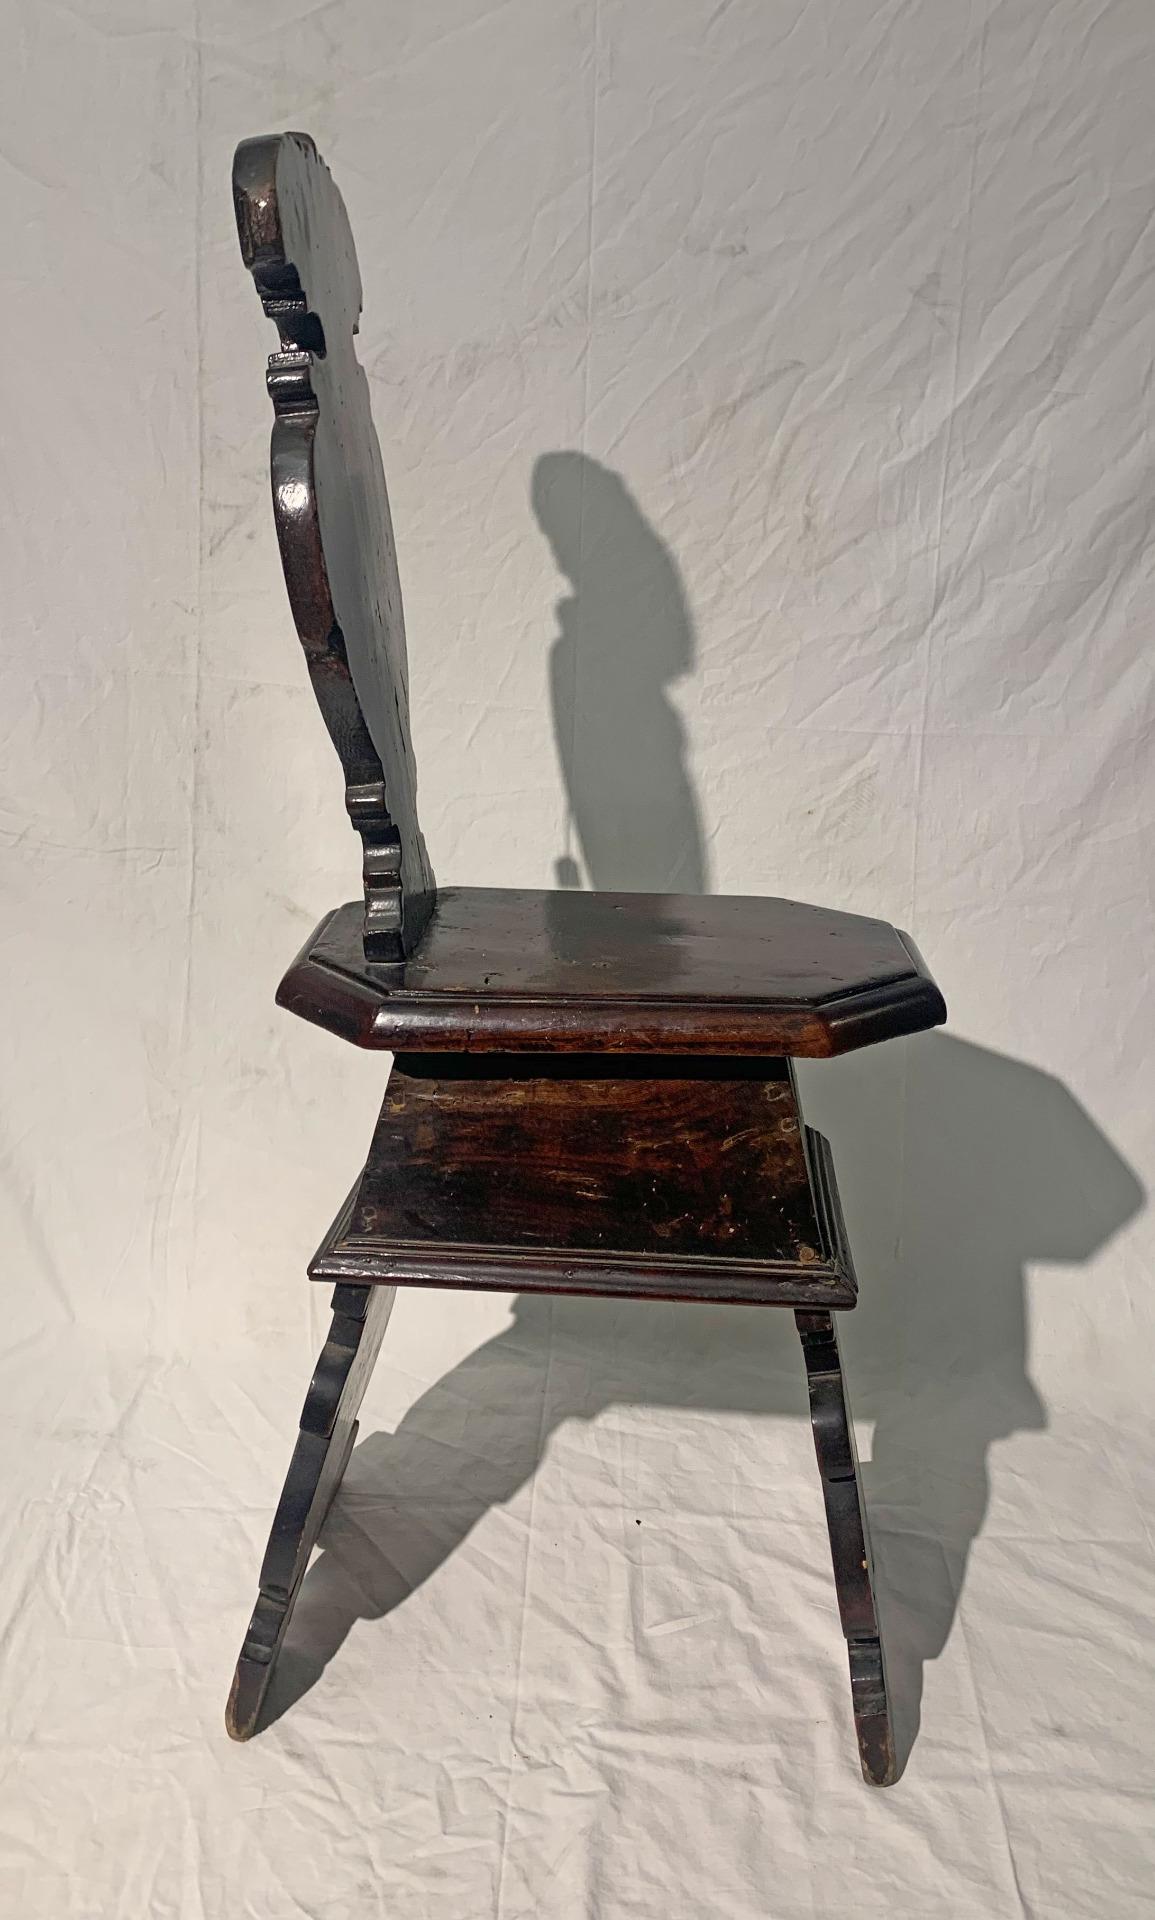 Typical stool with backrest and curved legs in solid walnut wood with dark patina. This type of bench is used in guard posts, for this reason the seat is small and uncomfortable, to prevent the soldier from falling asleep at night. The stool can be